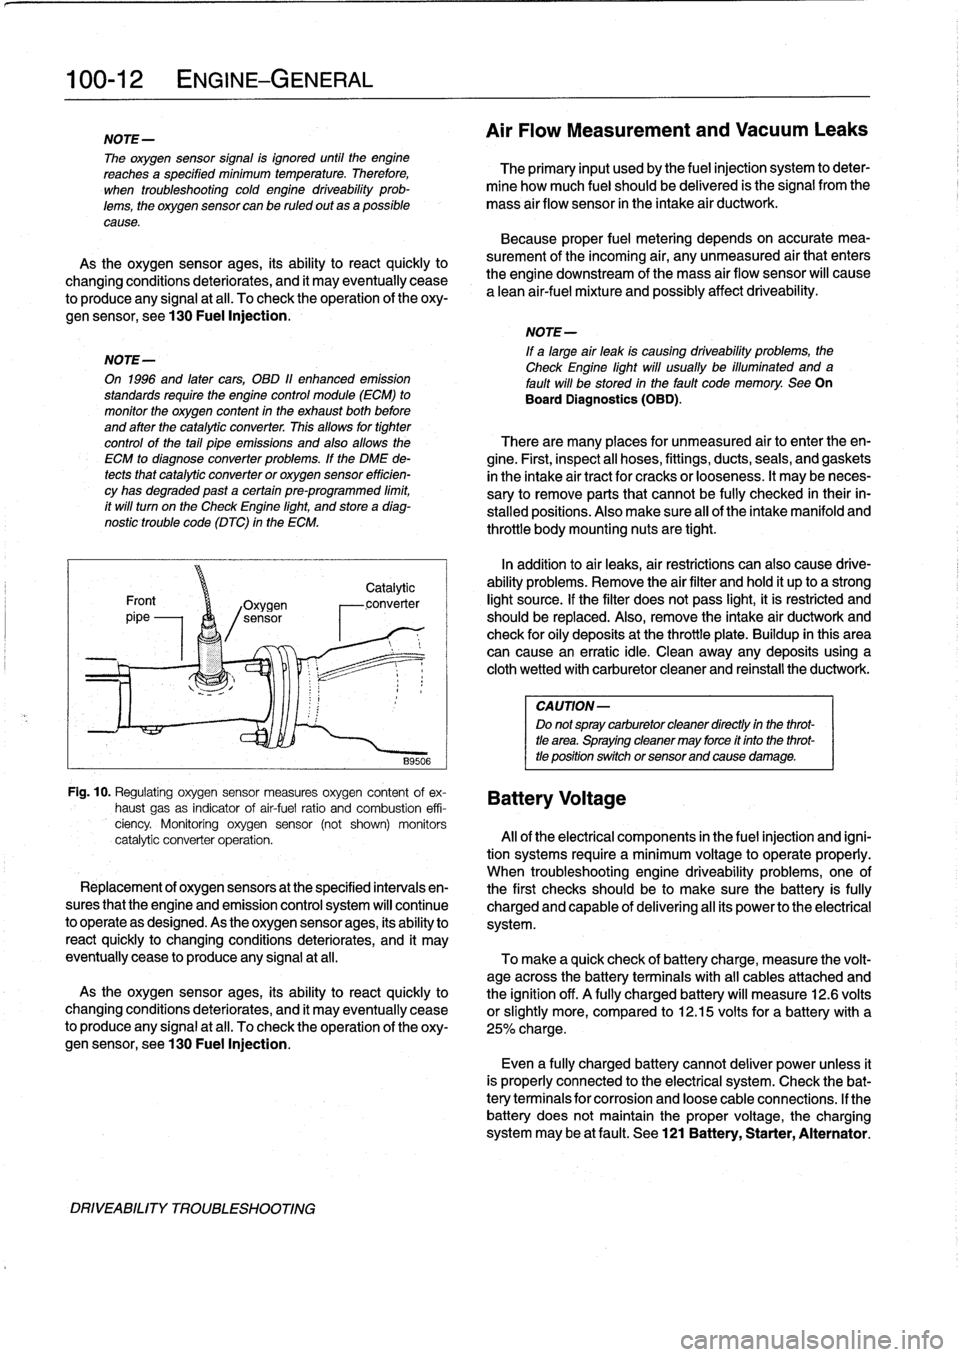 BMW 318i 1998 E36 Workshop Manual 
100-
1
2
ENGINE-GENERAL

NOTE-

The
oxygen
sensor
signal
is
ignored
until
the
engine
reachesa
specified
minimum
temperature
.
Therefore,

	

The
primary
input
usedby
the
fuel
injection
system
to
dete